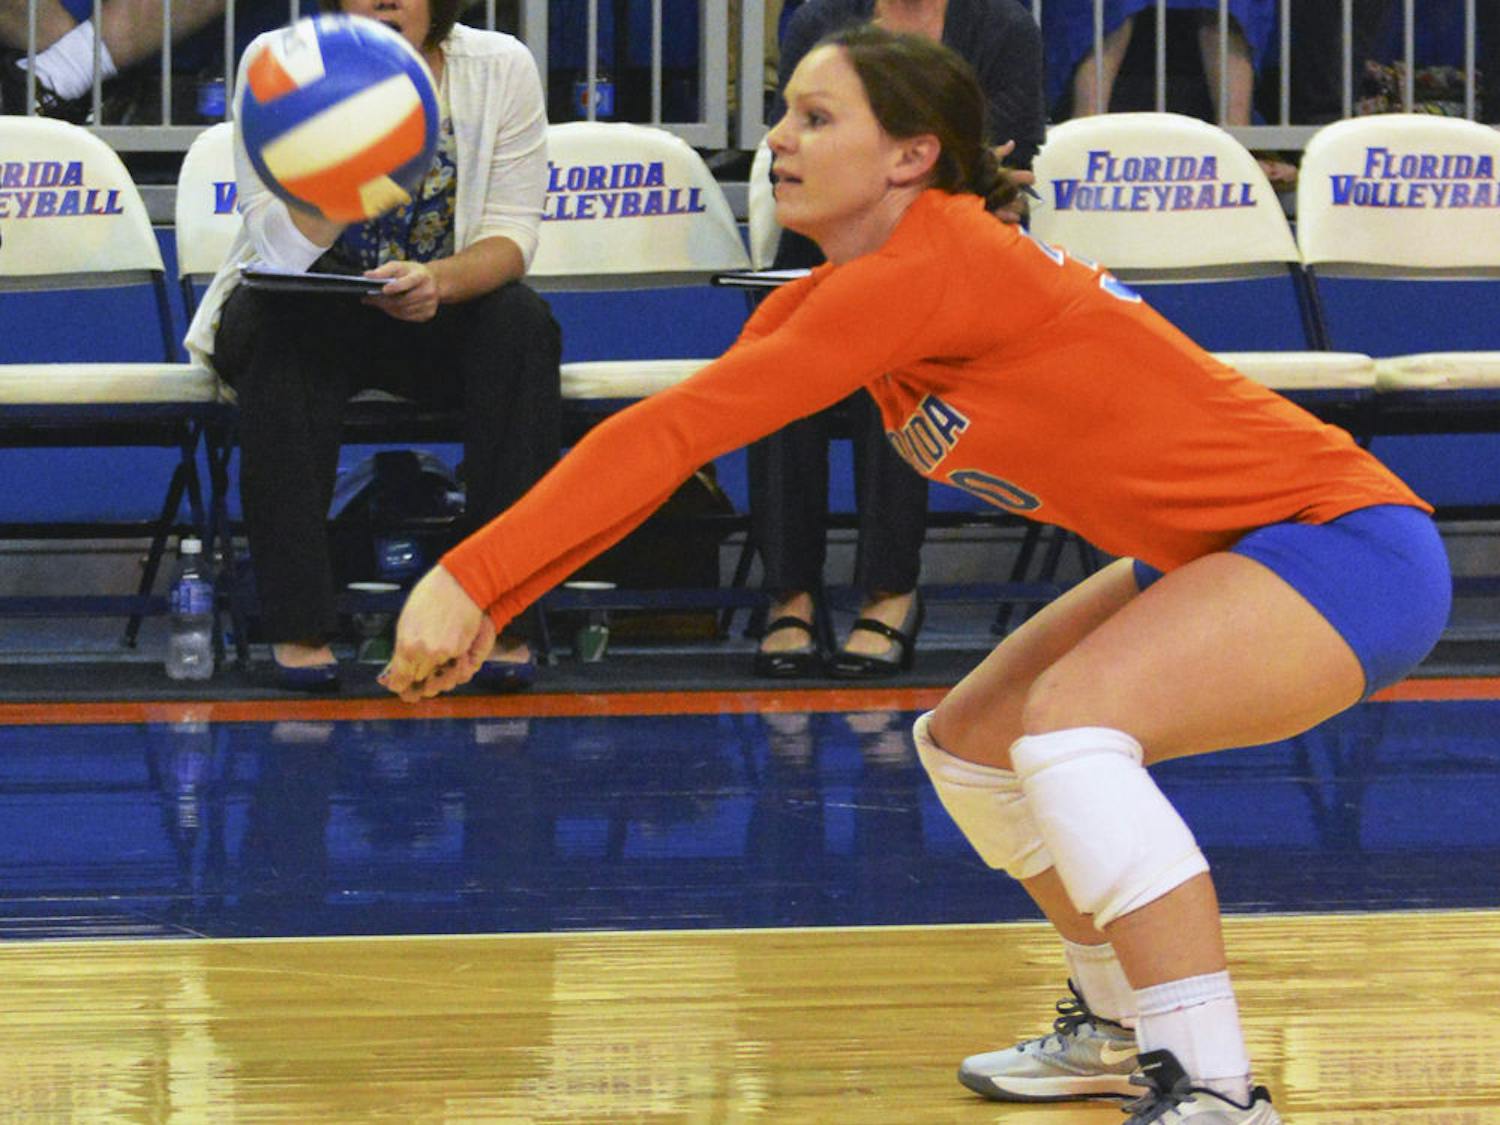 Holly Pole squats for a dig attempt during Florida's 3-0 win against Georgia.